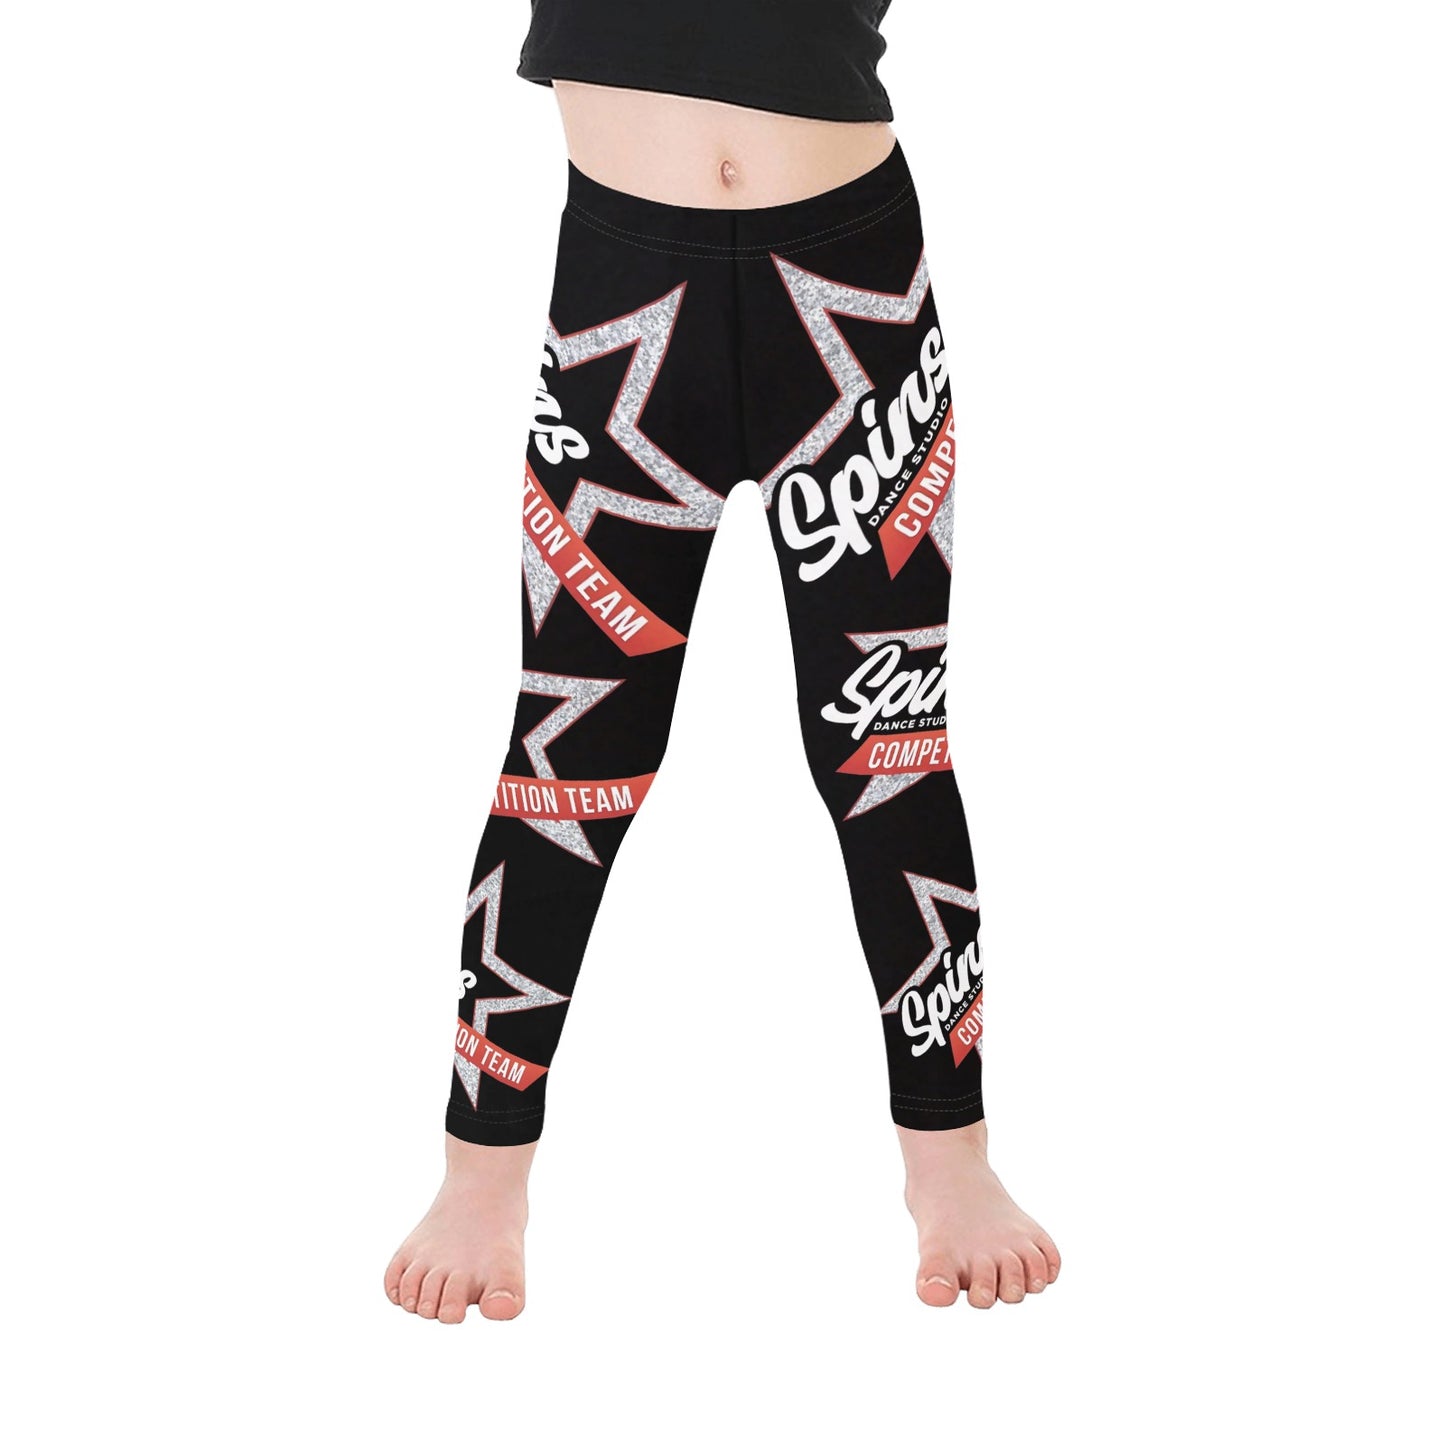 Spins Comp Team Youth Leggings